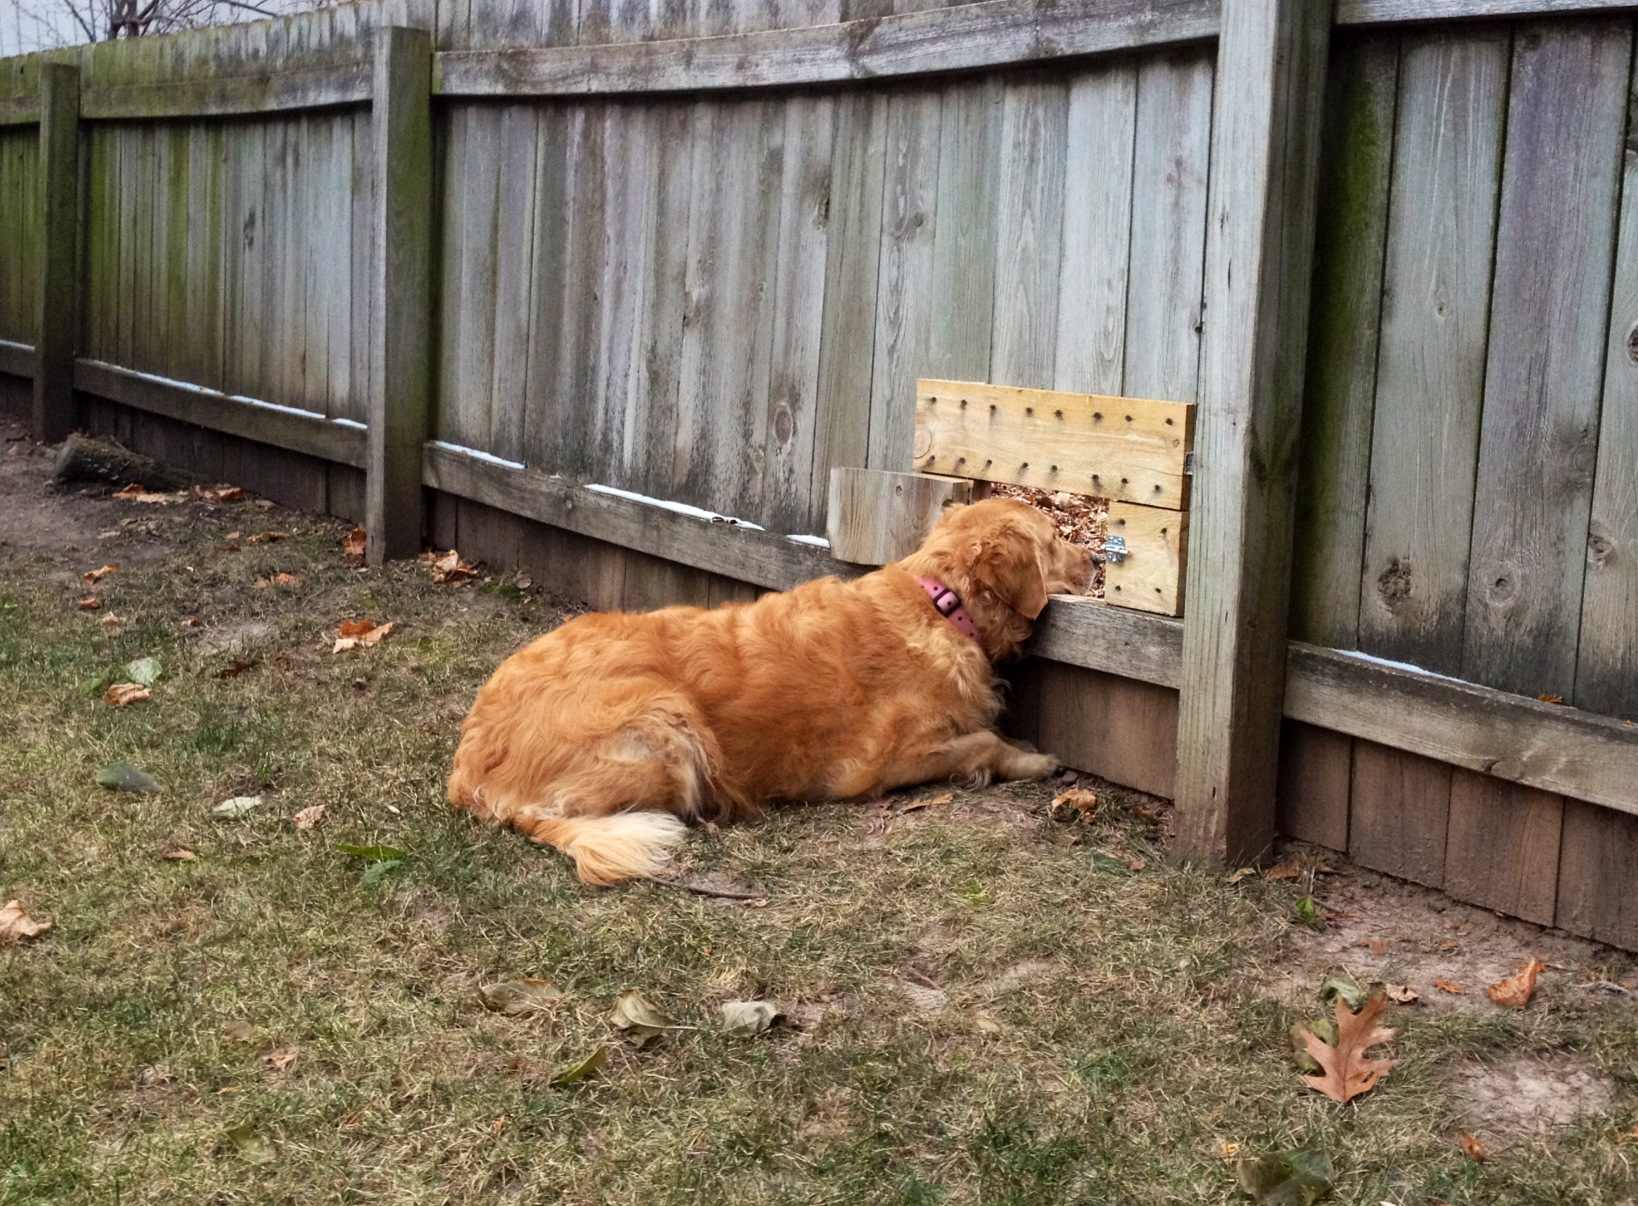 My dog waiting for her friends thanks to her custom fence - Imgur